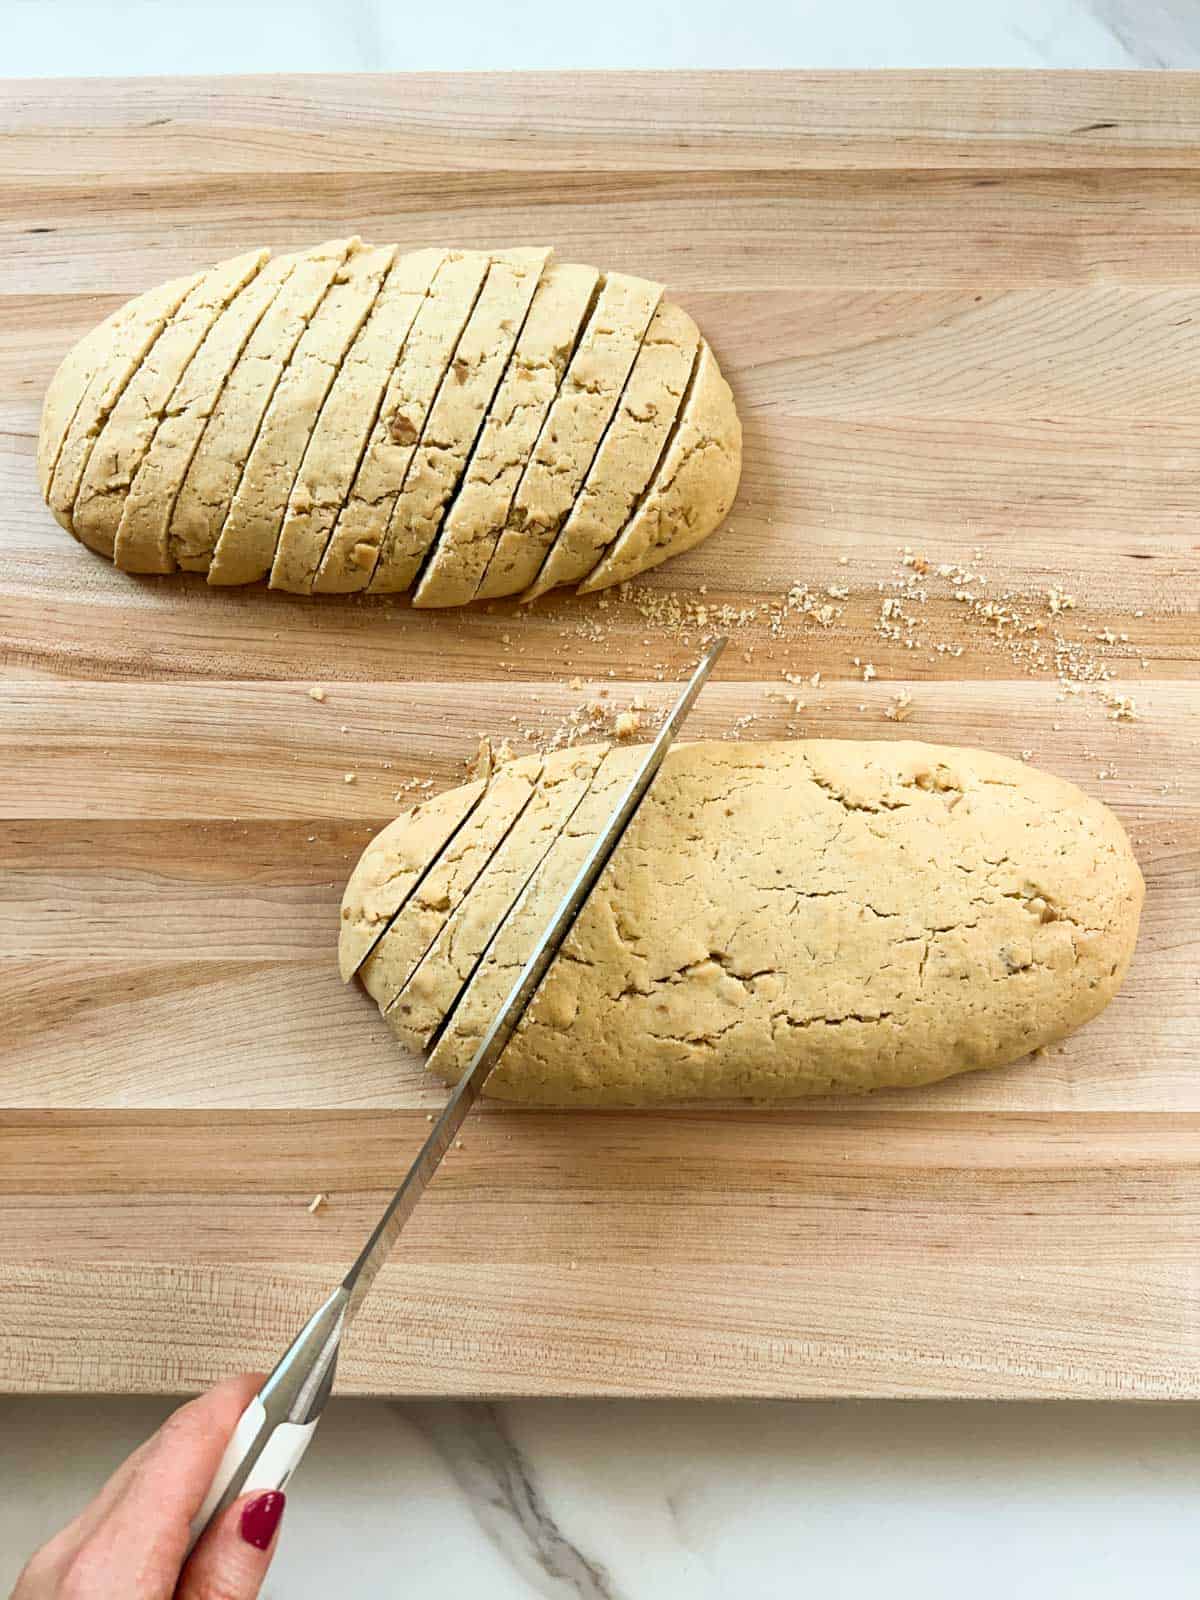 A hand holding a serrated knife is slicing biscotti loaves on a wooden cutting board.